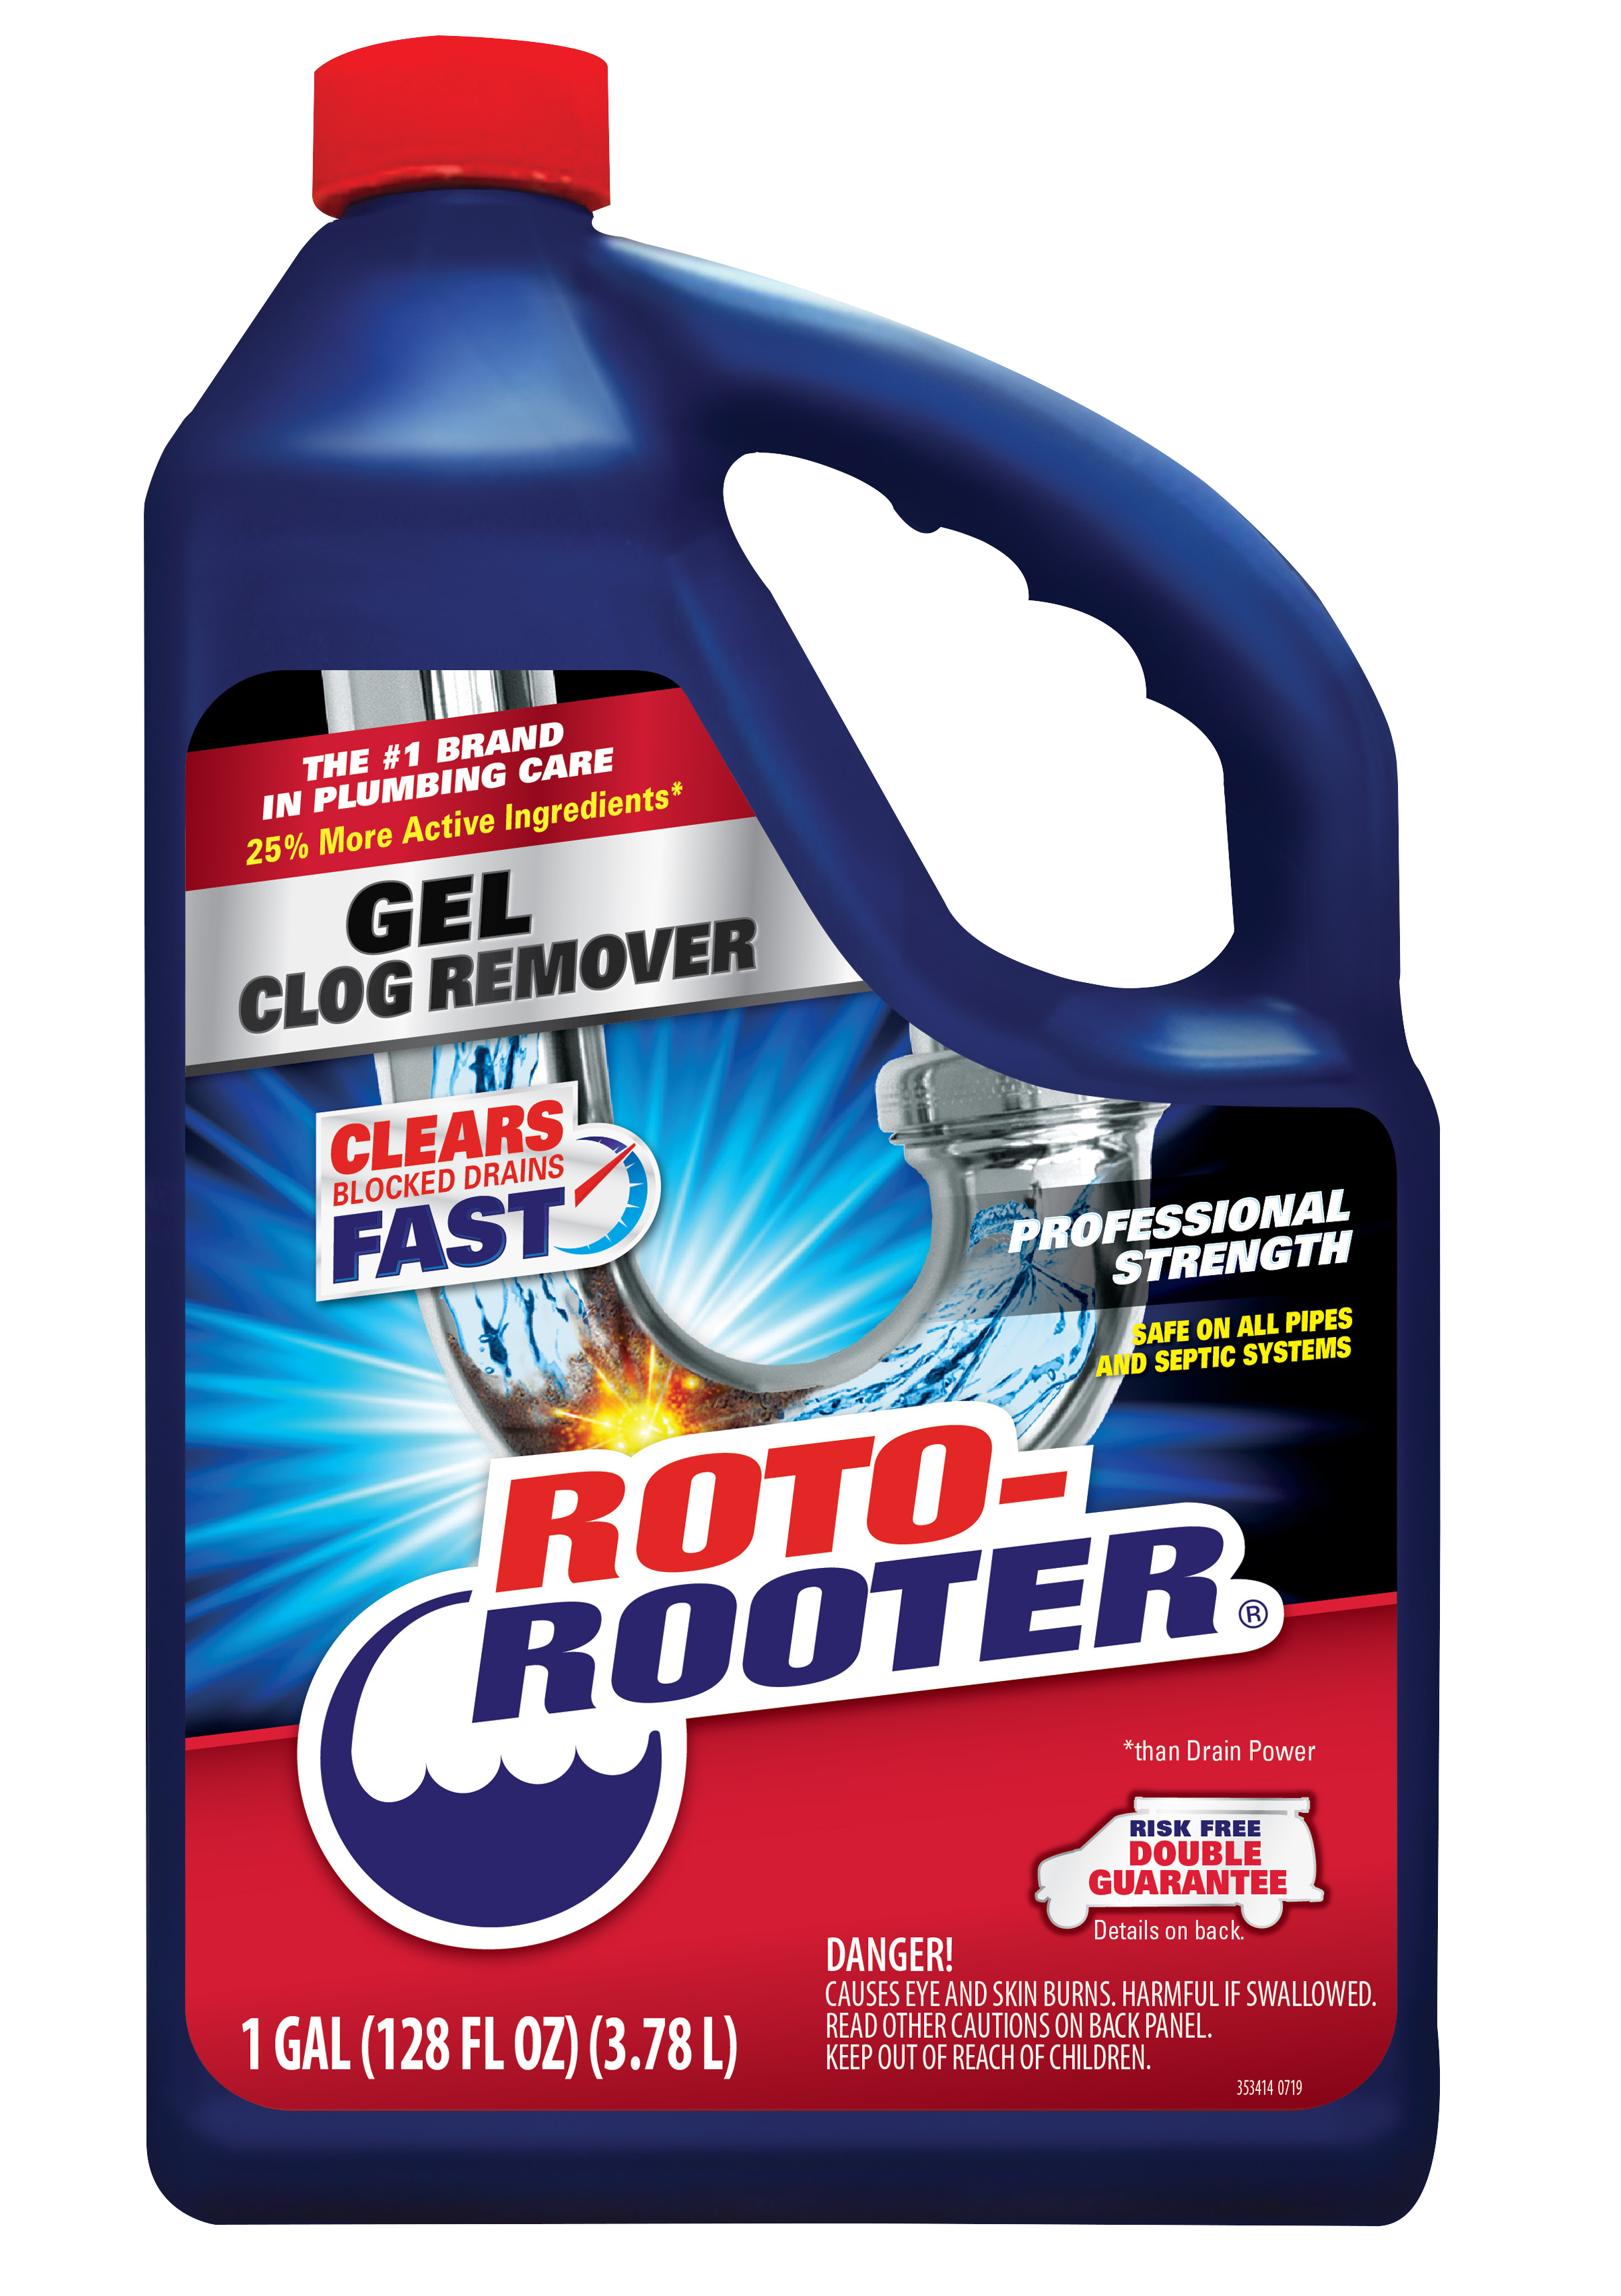 ROTO-ROOTER GEL CLOG REMOVER, 1GAL